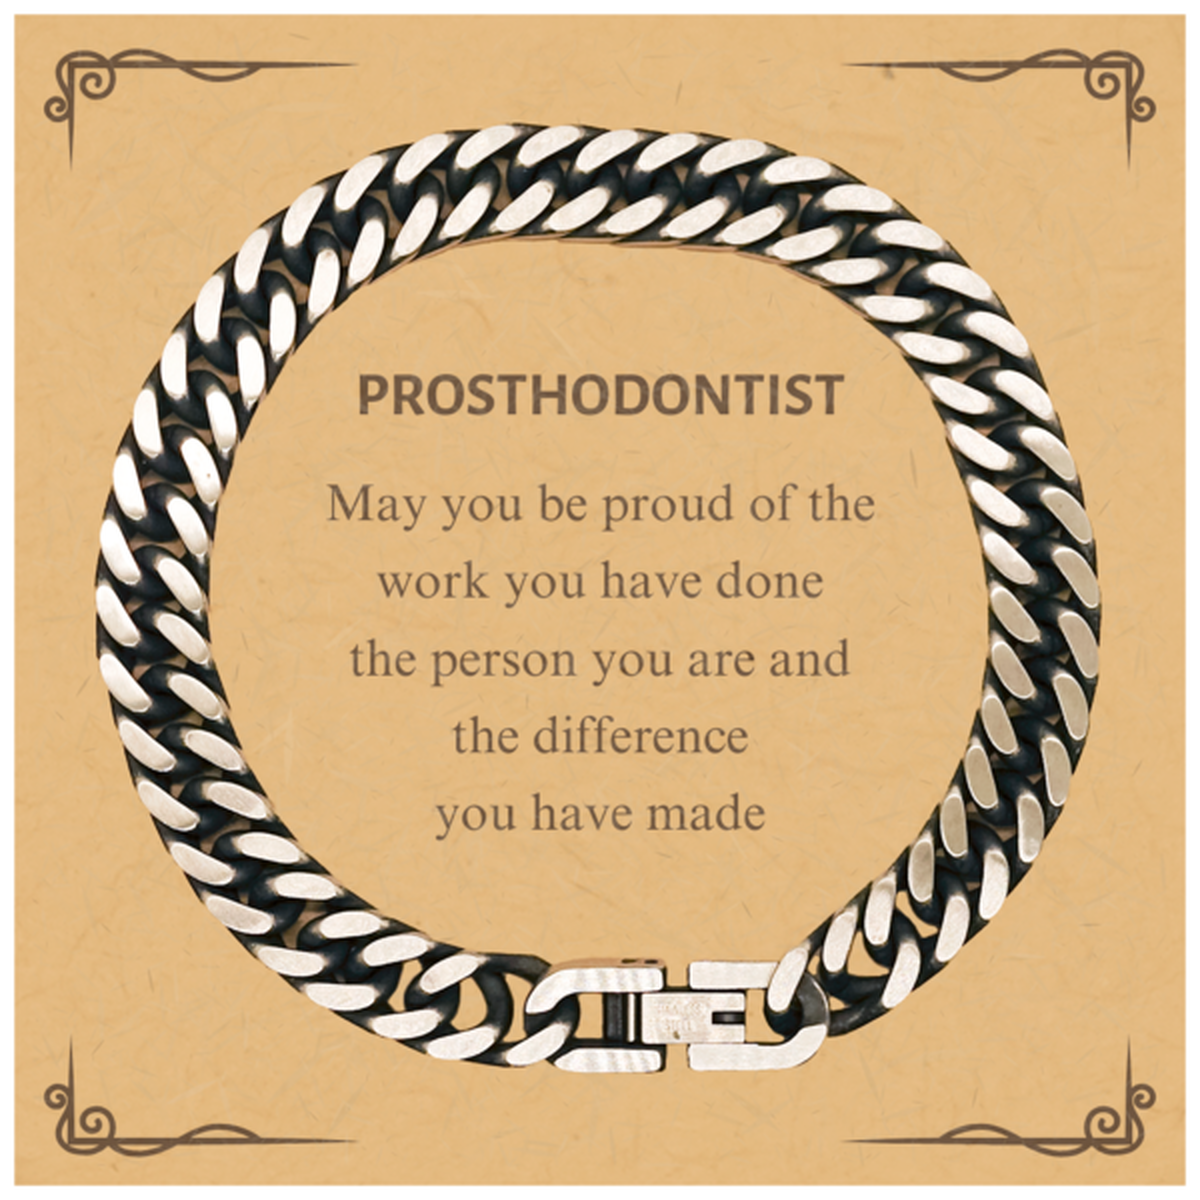 Prosthodontist May you be proud of the work you have done, Retirement Prosthodontist Cuban Link Chain Bracelet for Colleague Appreciation Gifts Amazing for Prosthodontist